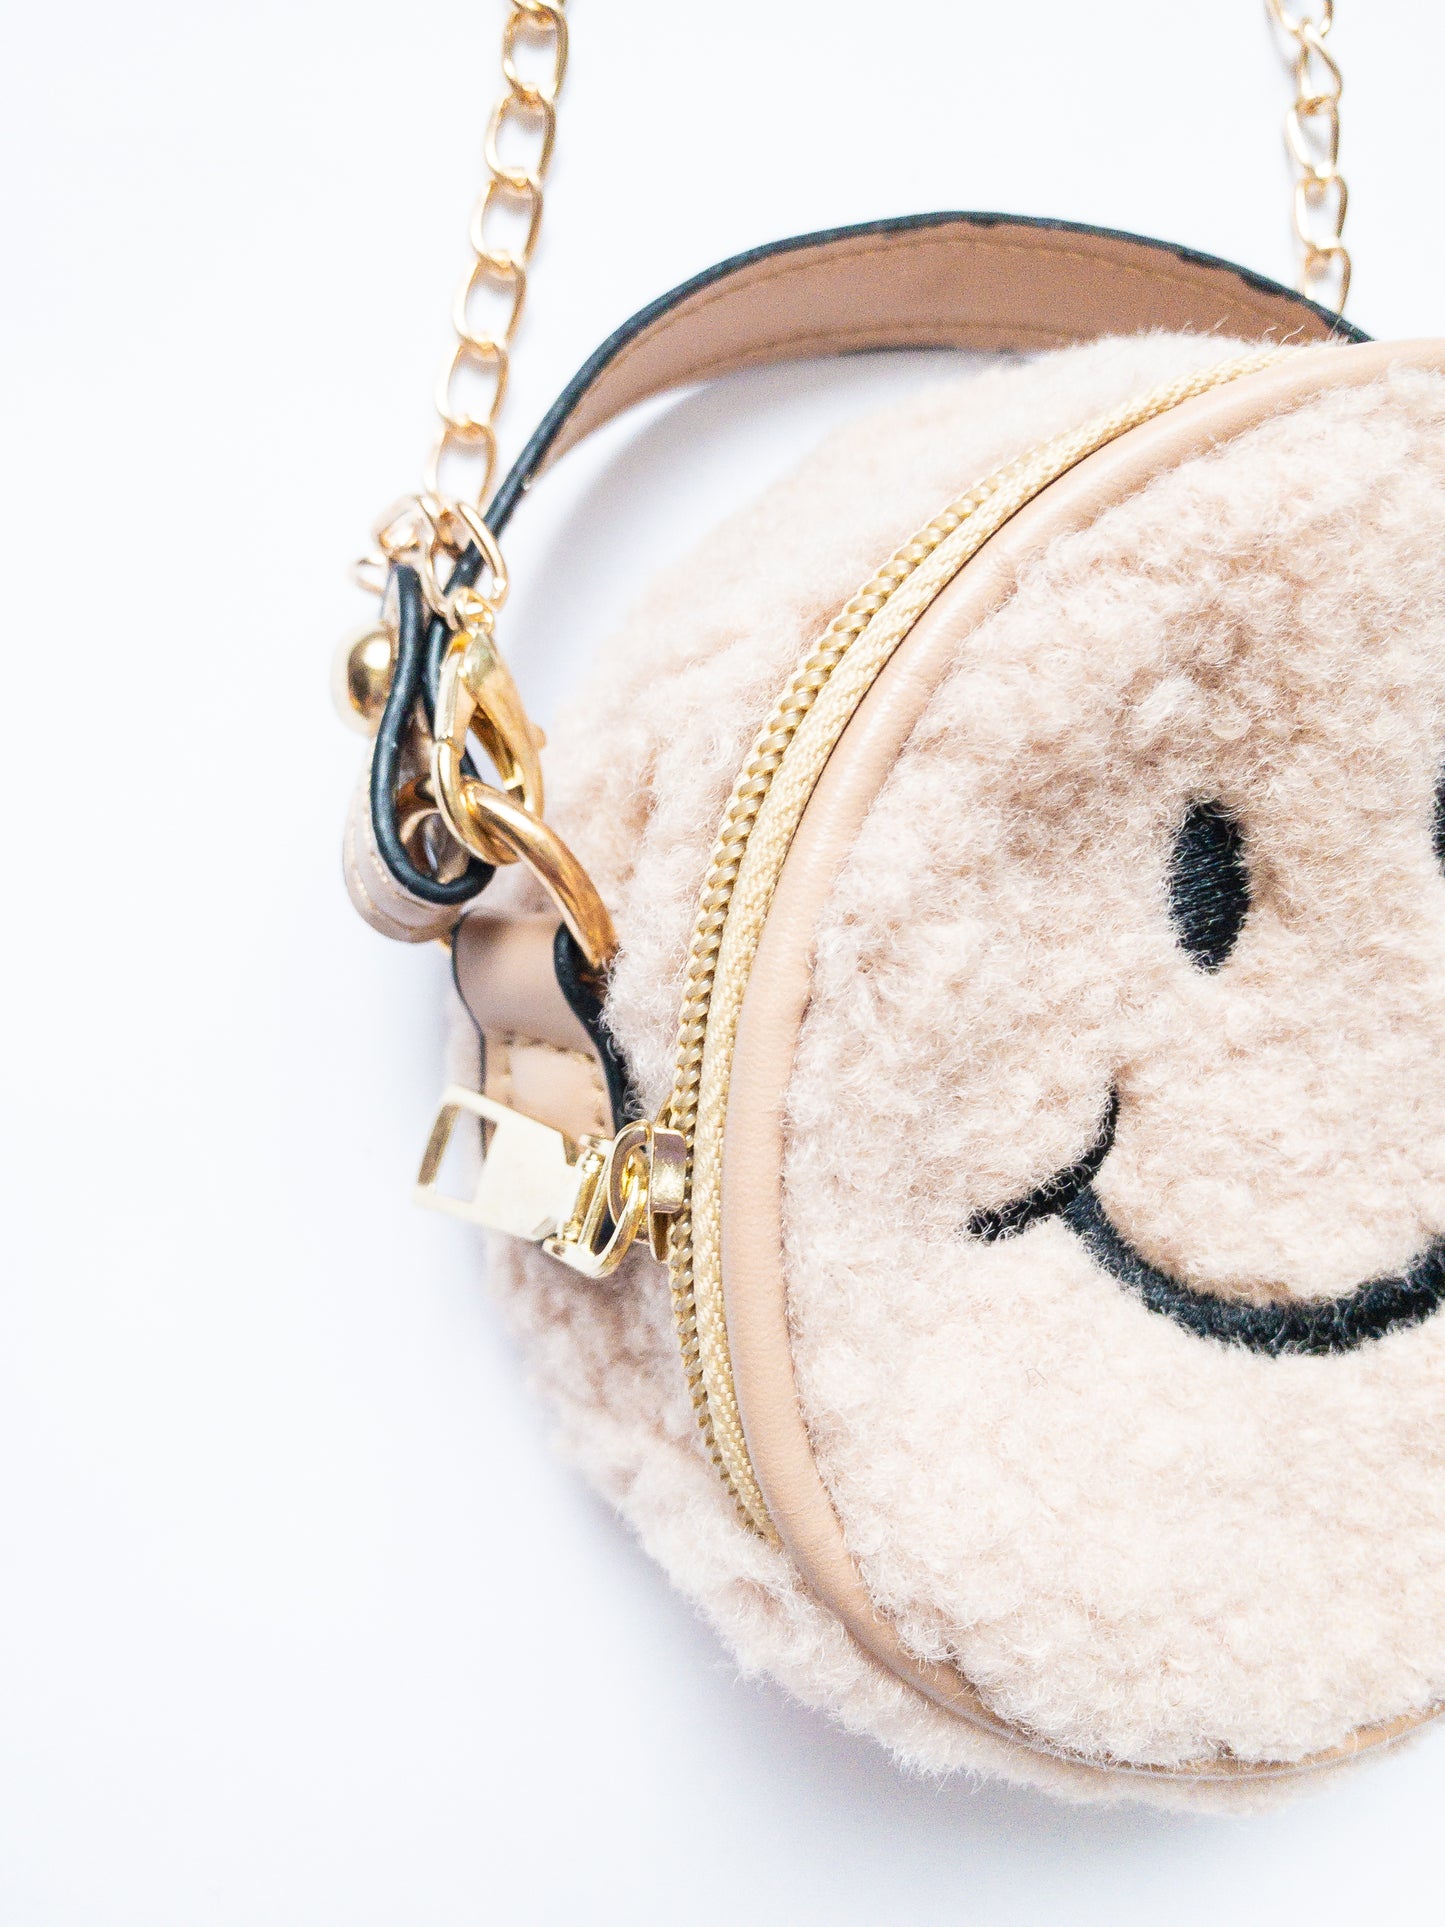 The cutest smiley face bag! This little purse is fuzzy and happy with a single zip open. It has a small open pocket in the back and a short vegan leather handle. The gold chain strap is removable. Choose from 3 cute colors.